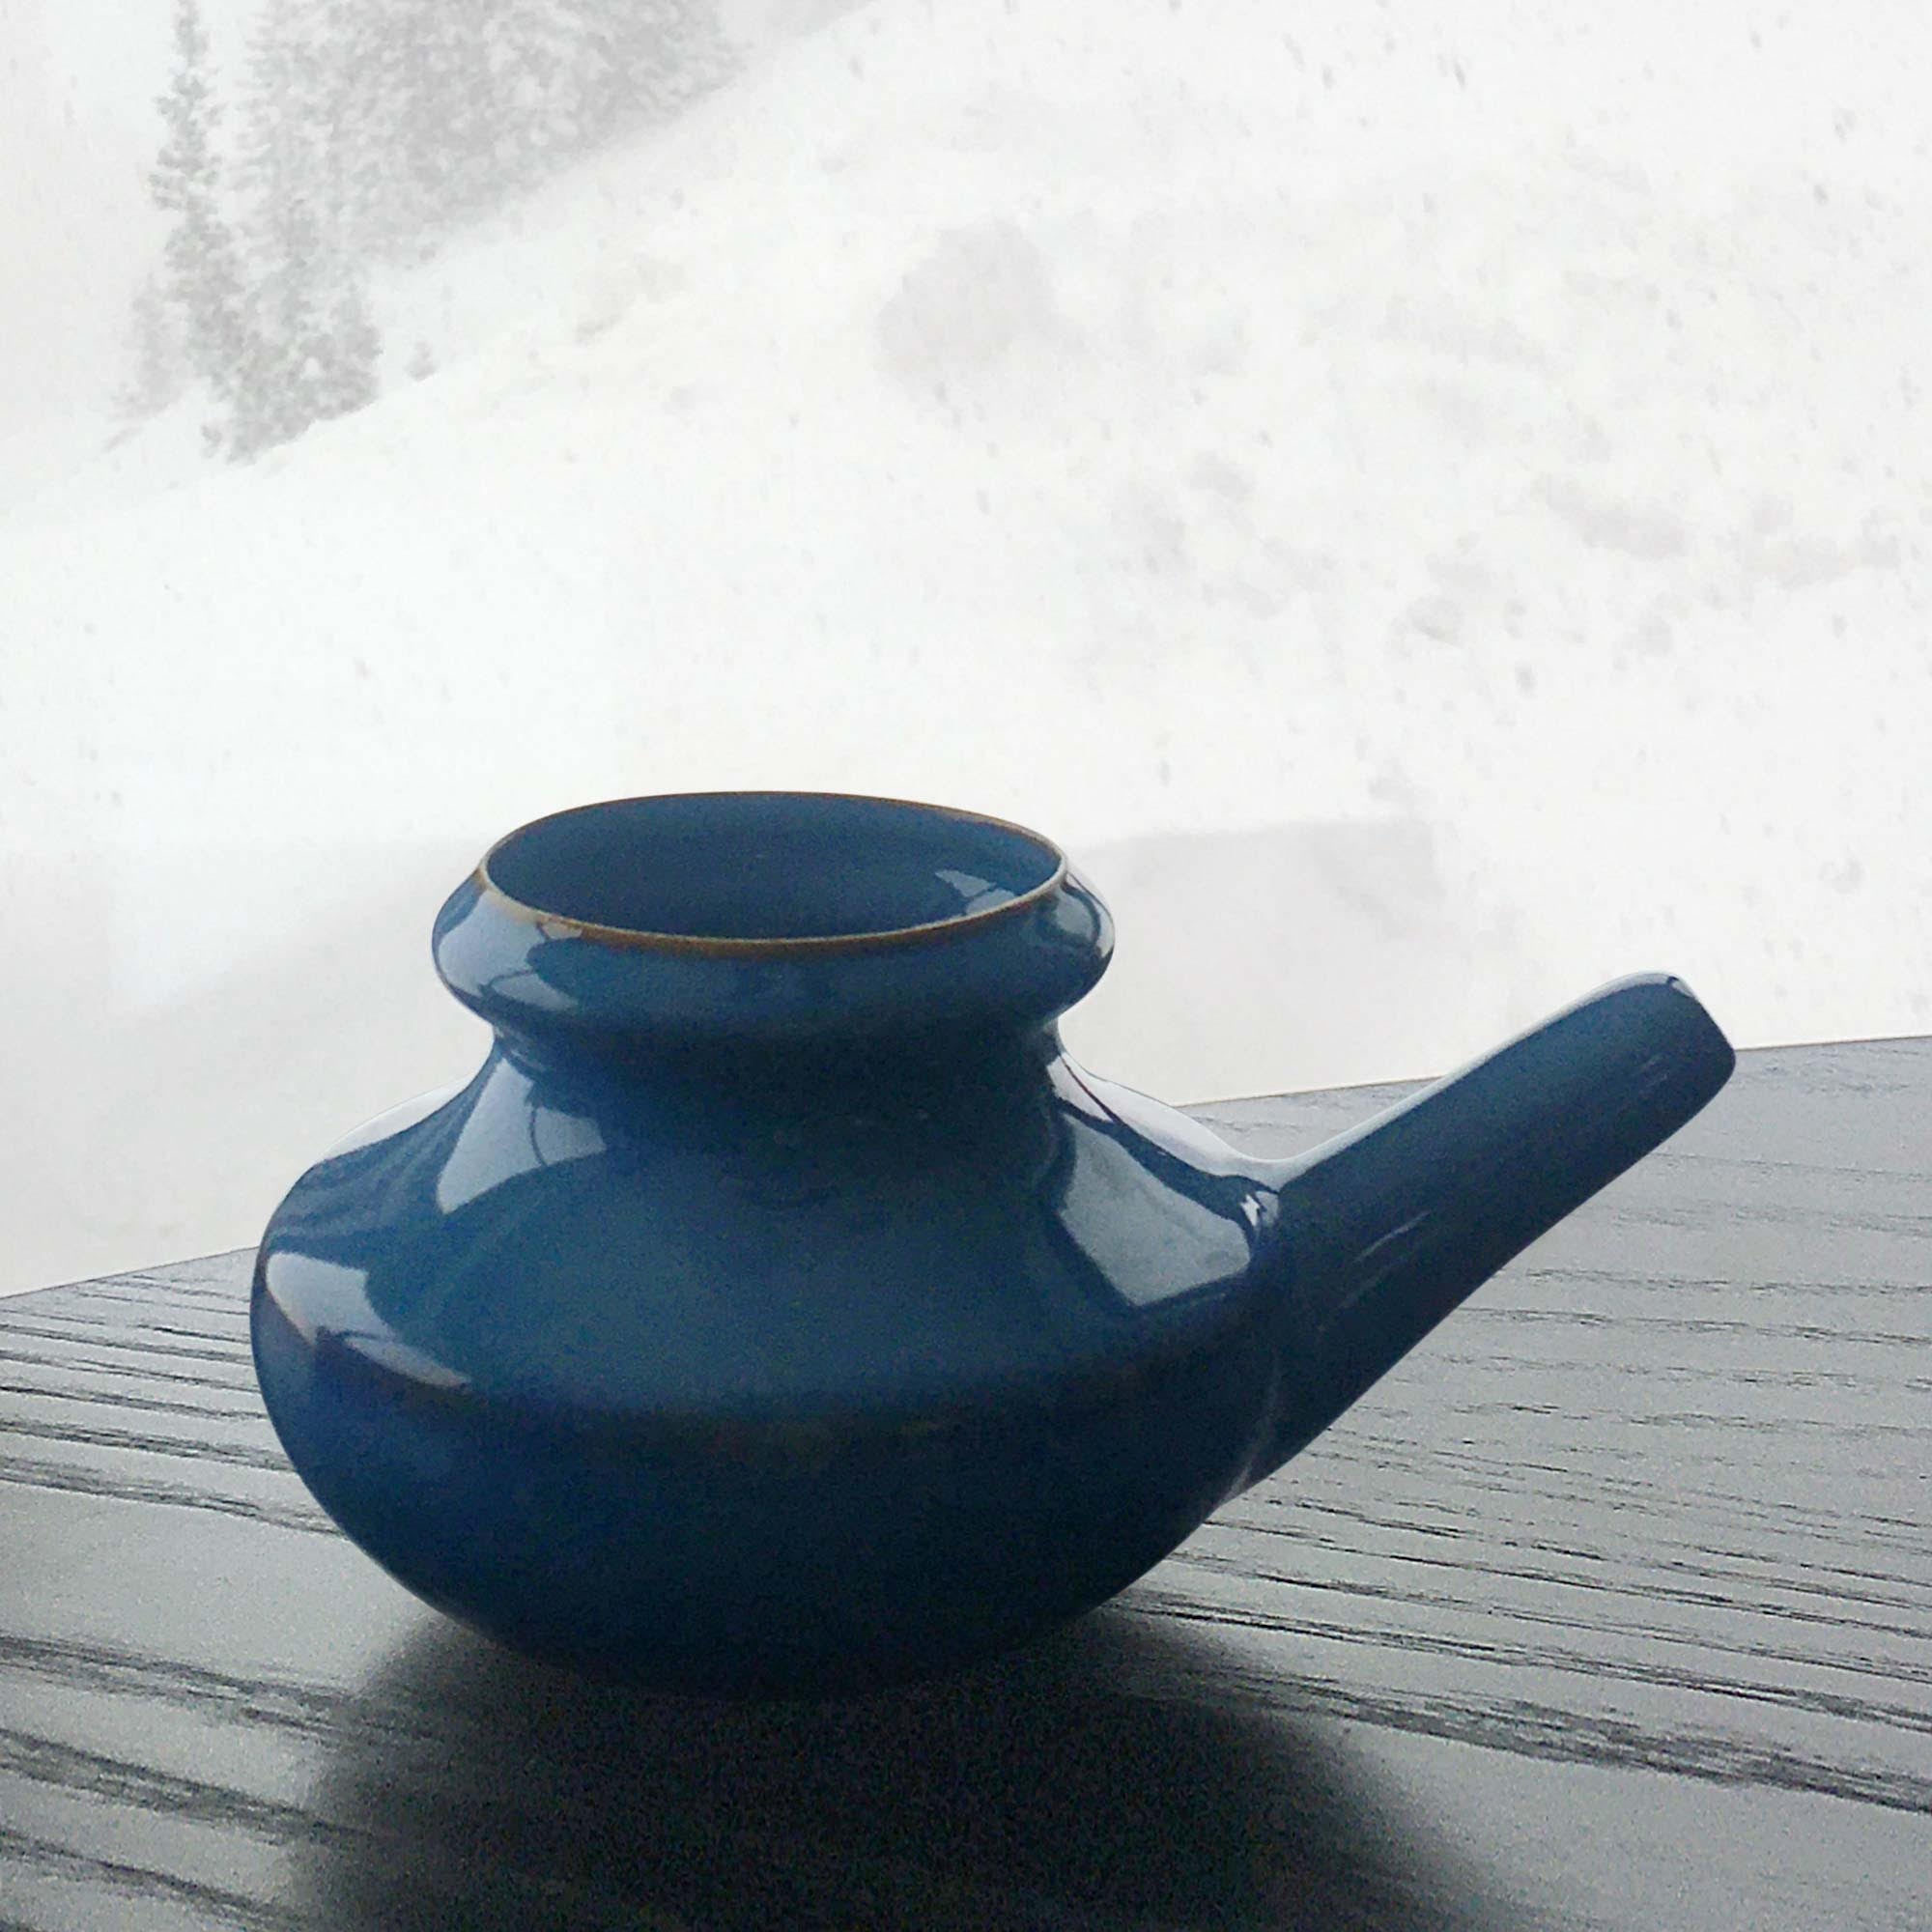 Dusk Blue Neti Pot ceramic blue with brown accents on table with snowy background